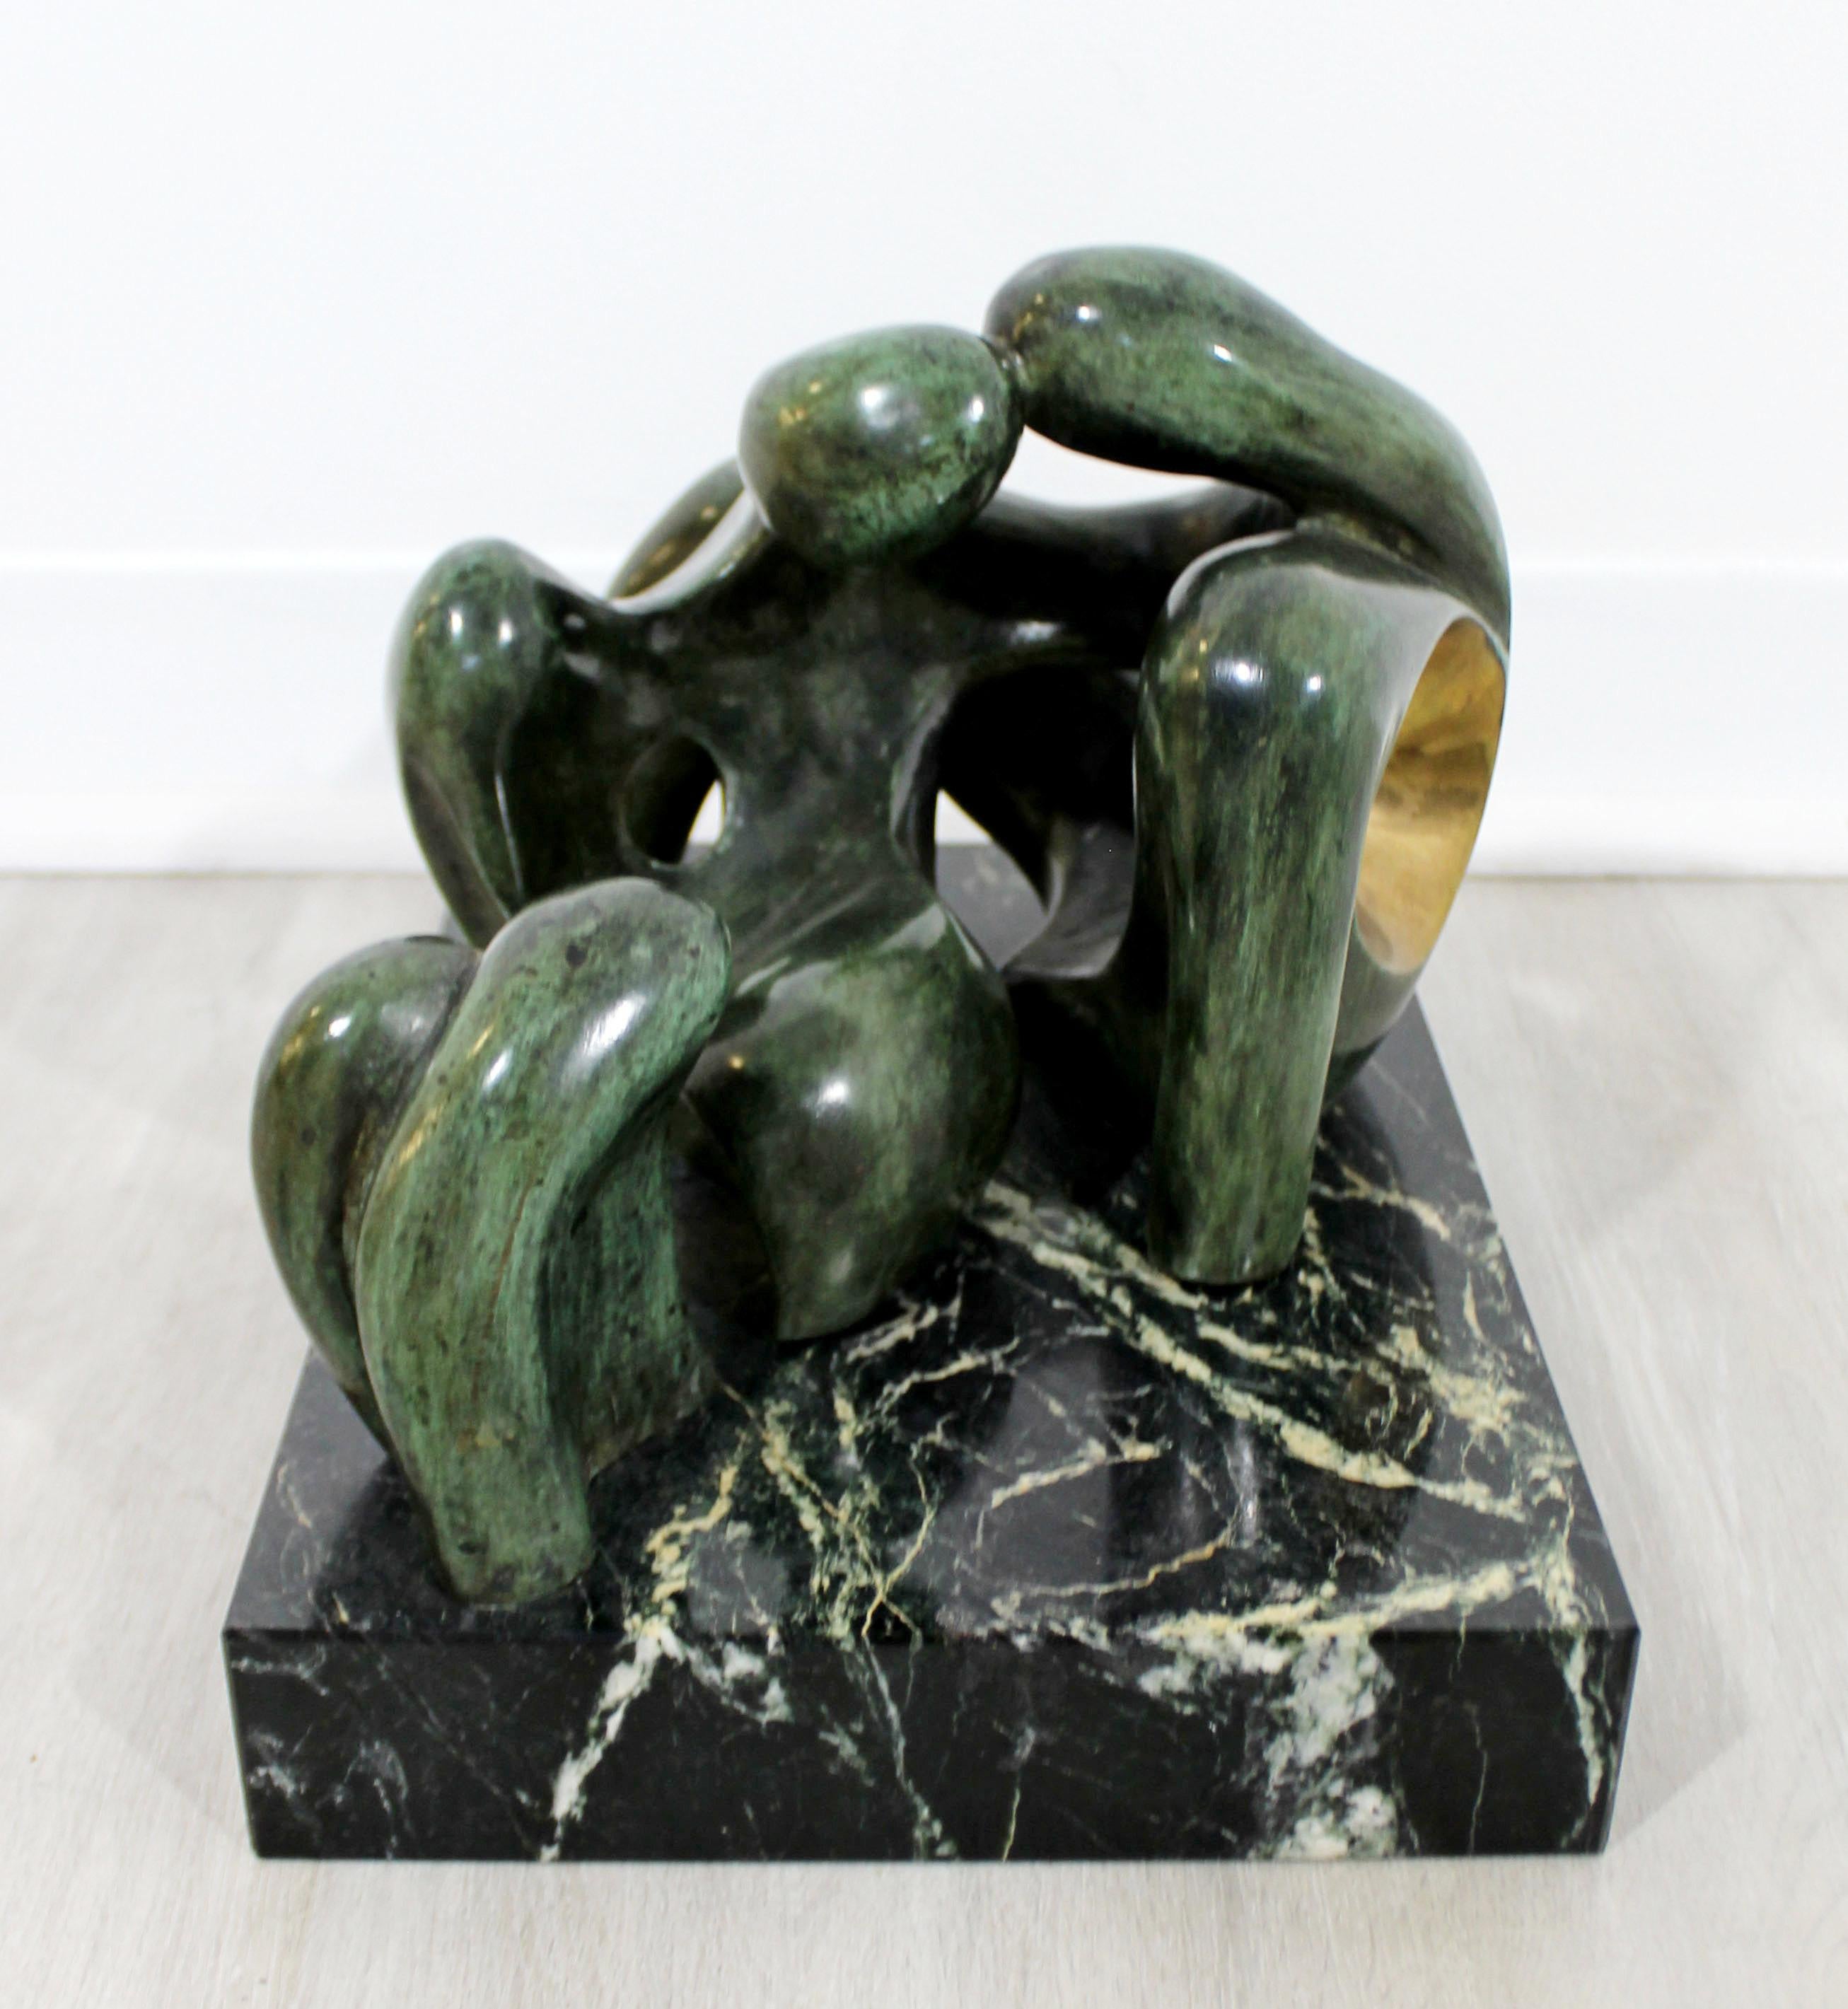 Late 20th Century Mid-Century Modern Bronze Marble Table Sculpture Signed Porret in Time 1/6 1970s